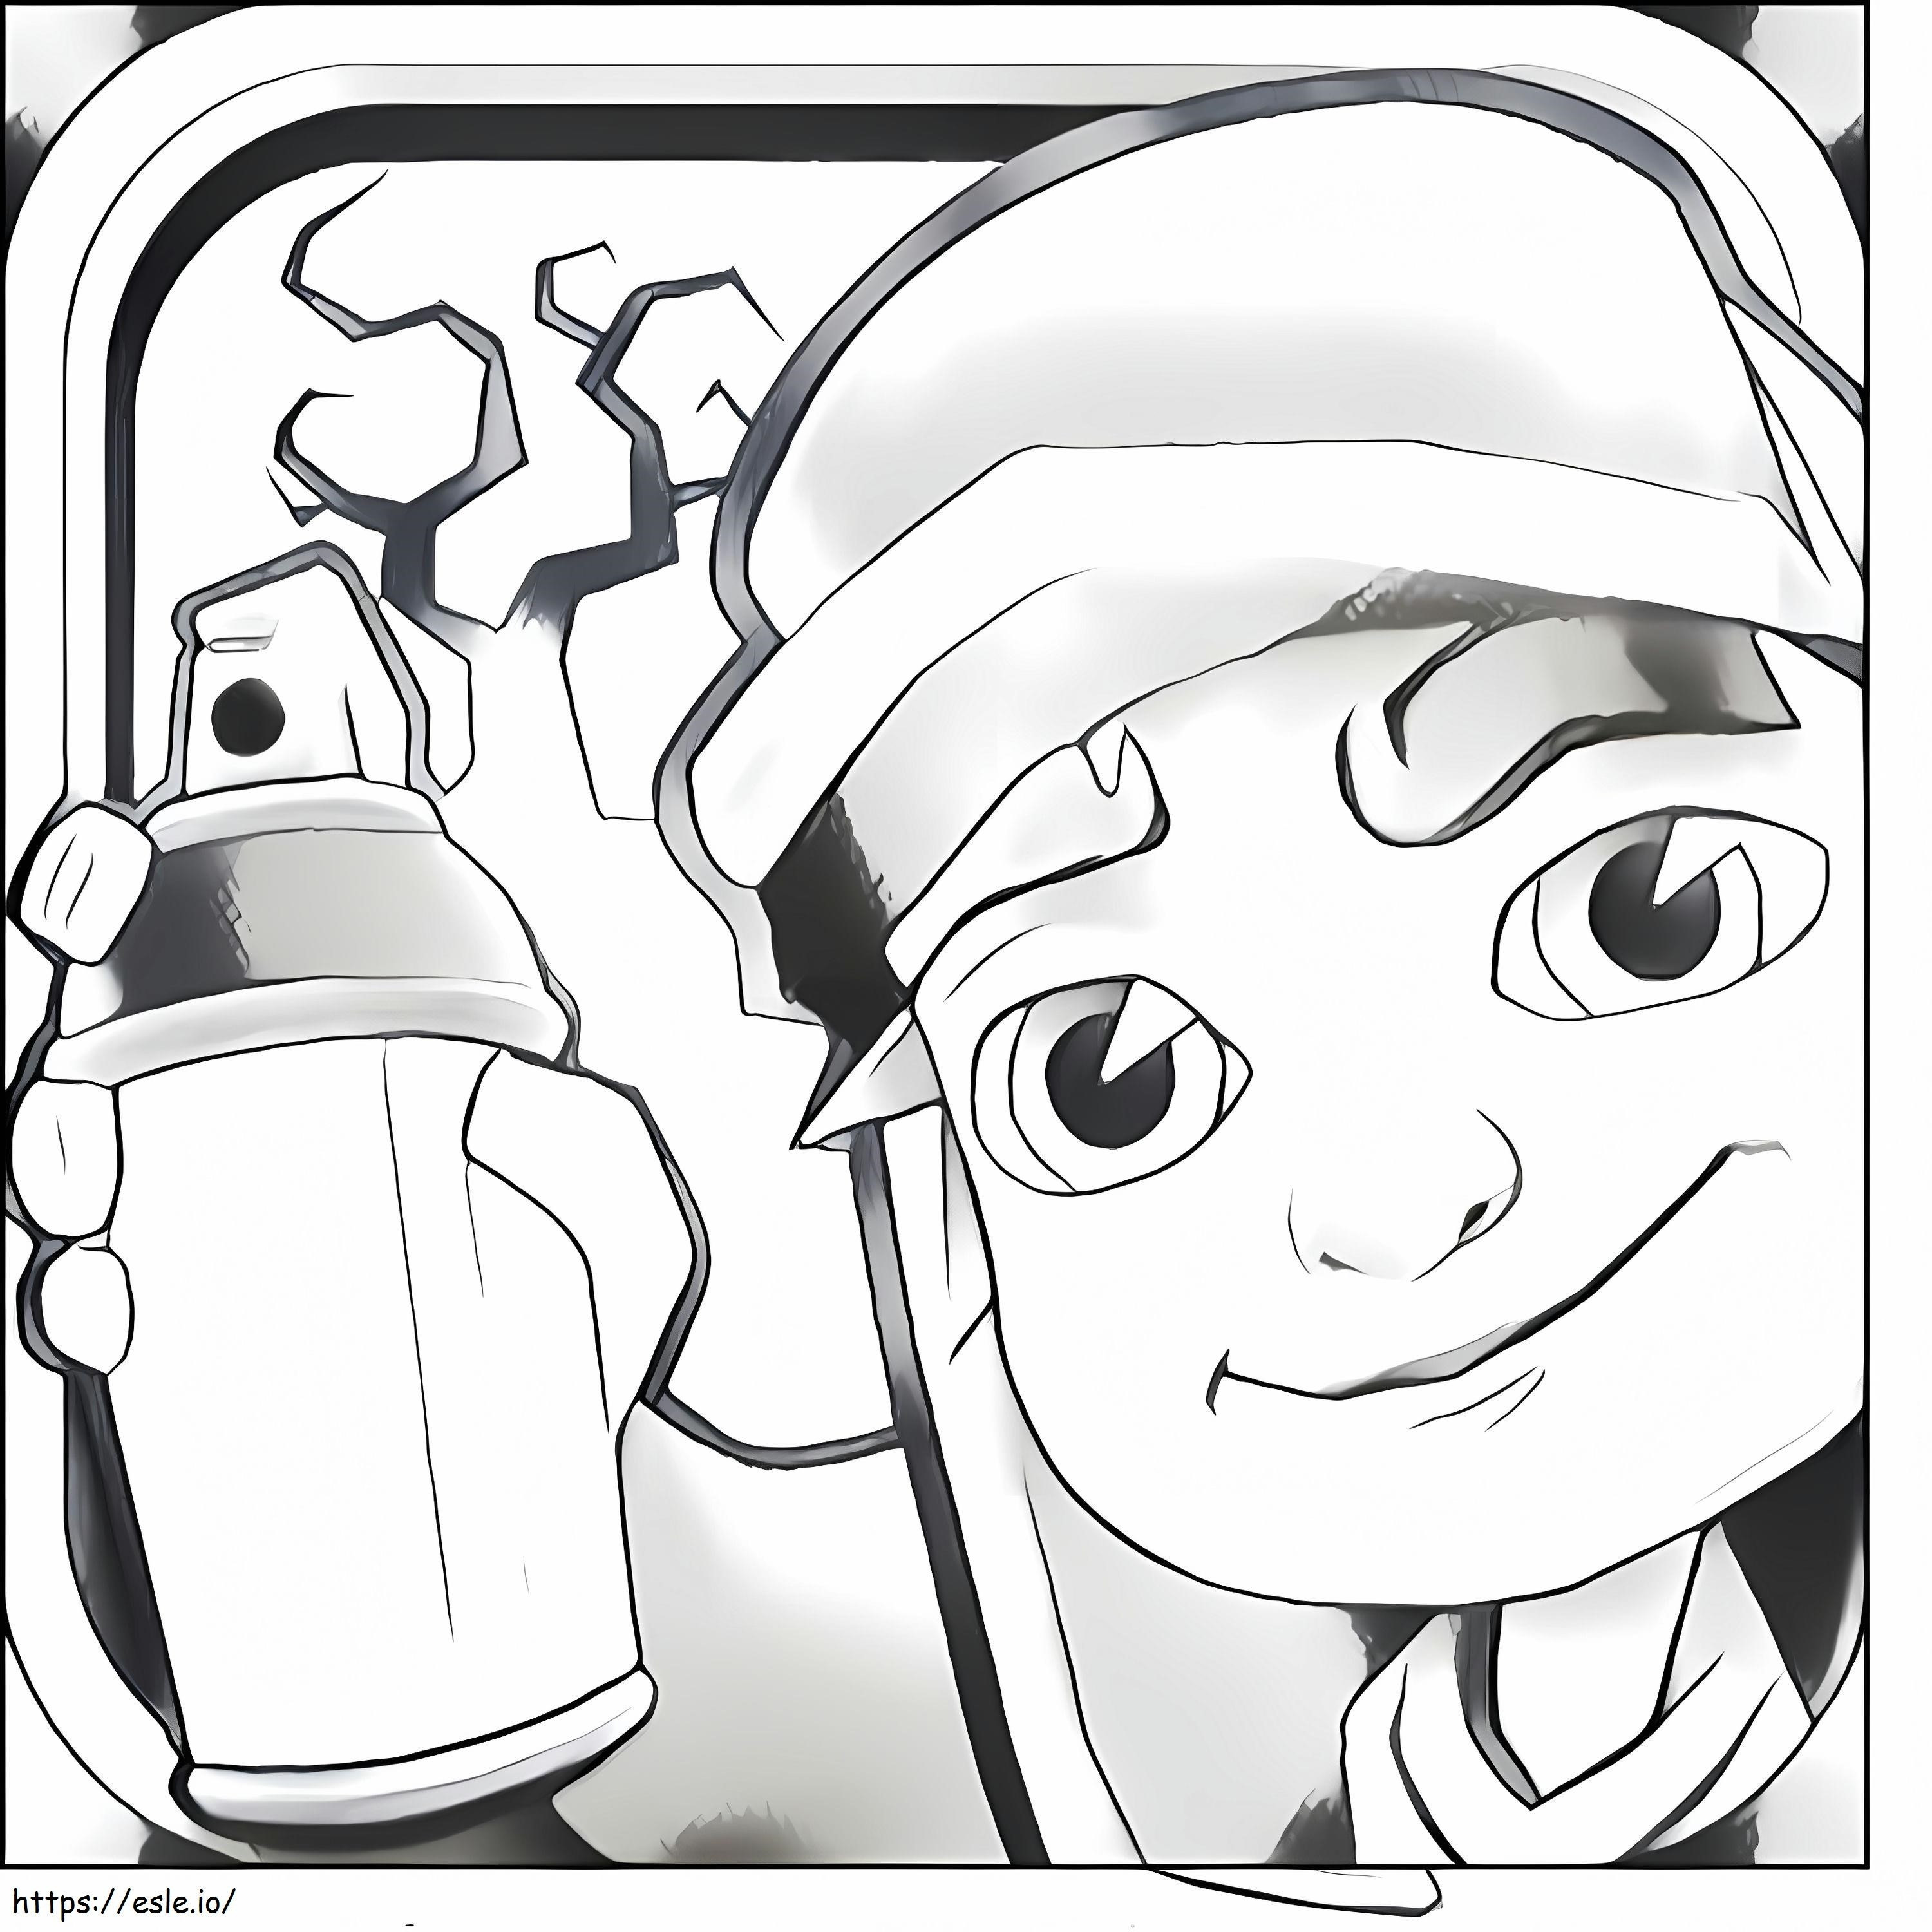 Jake Subway Surfers coloring page